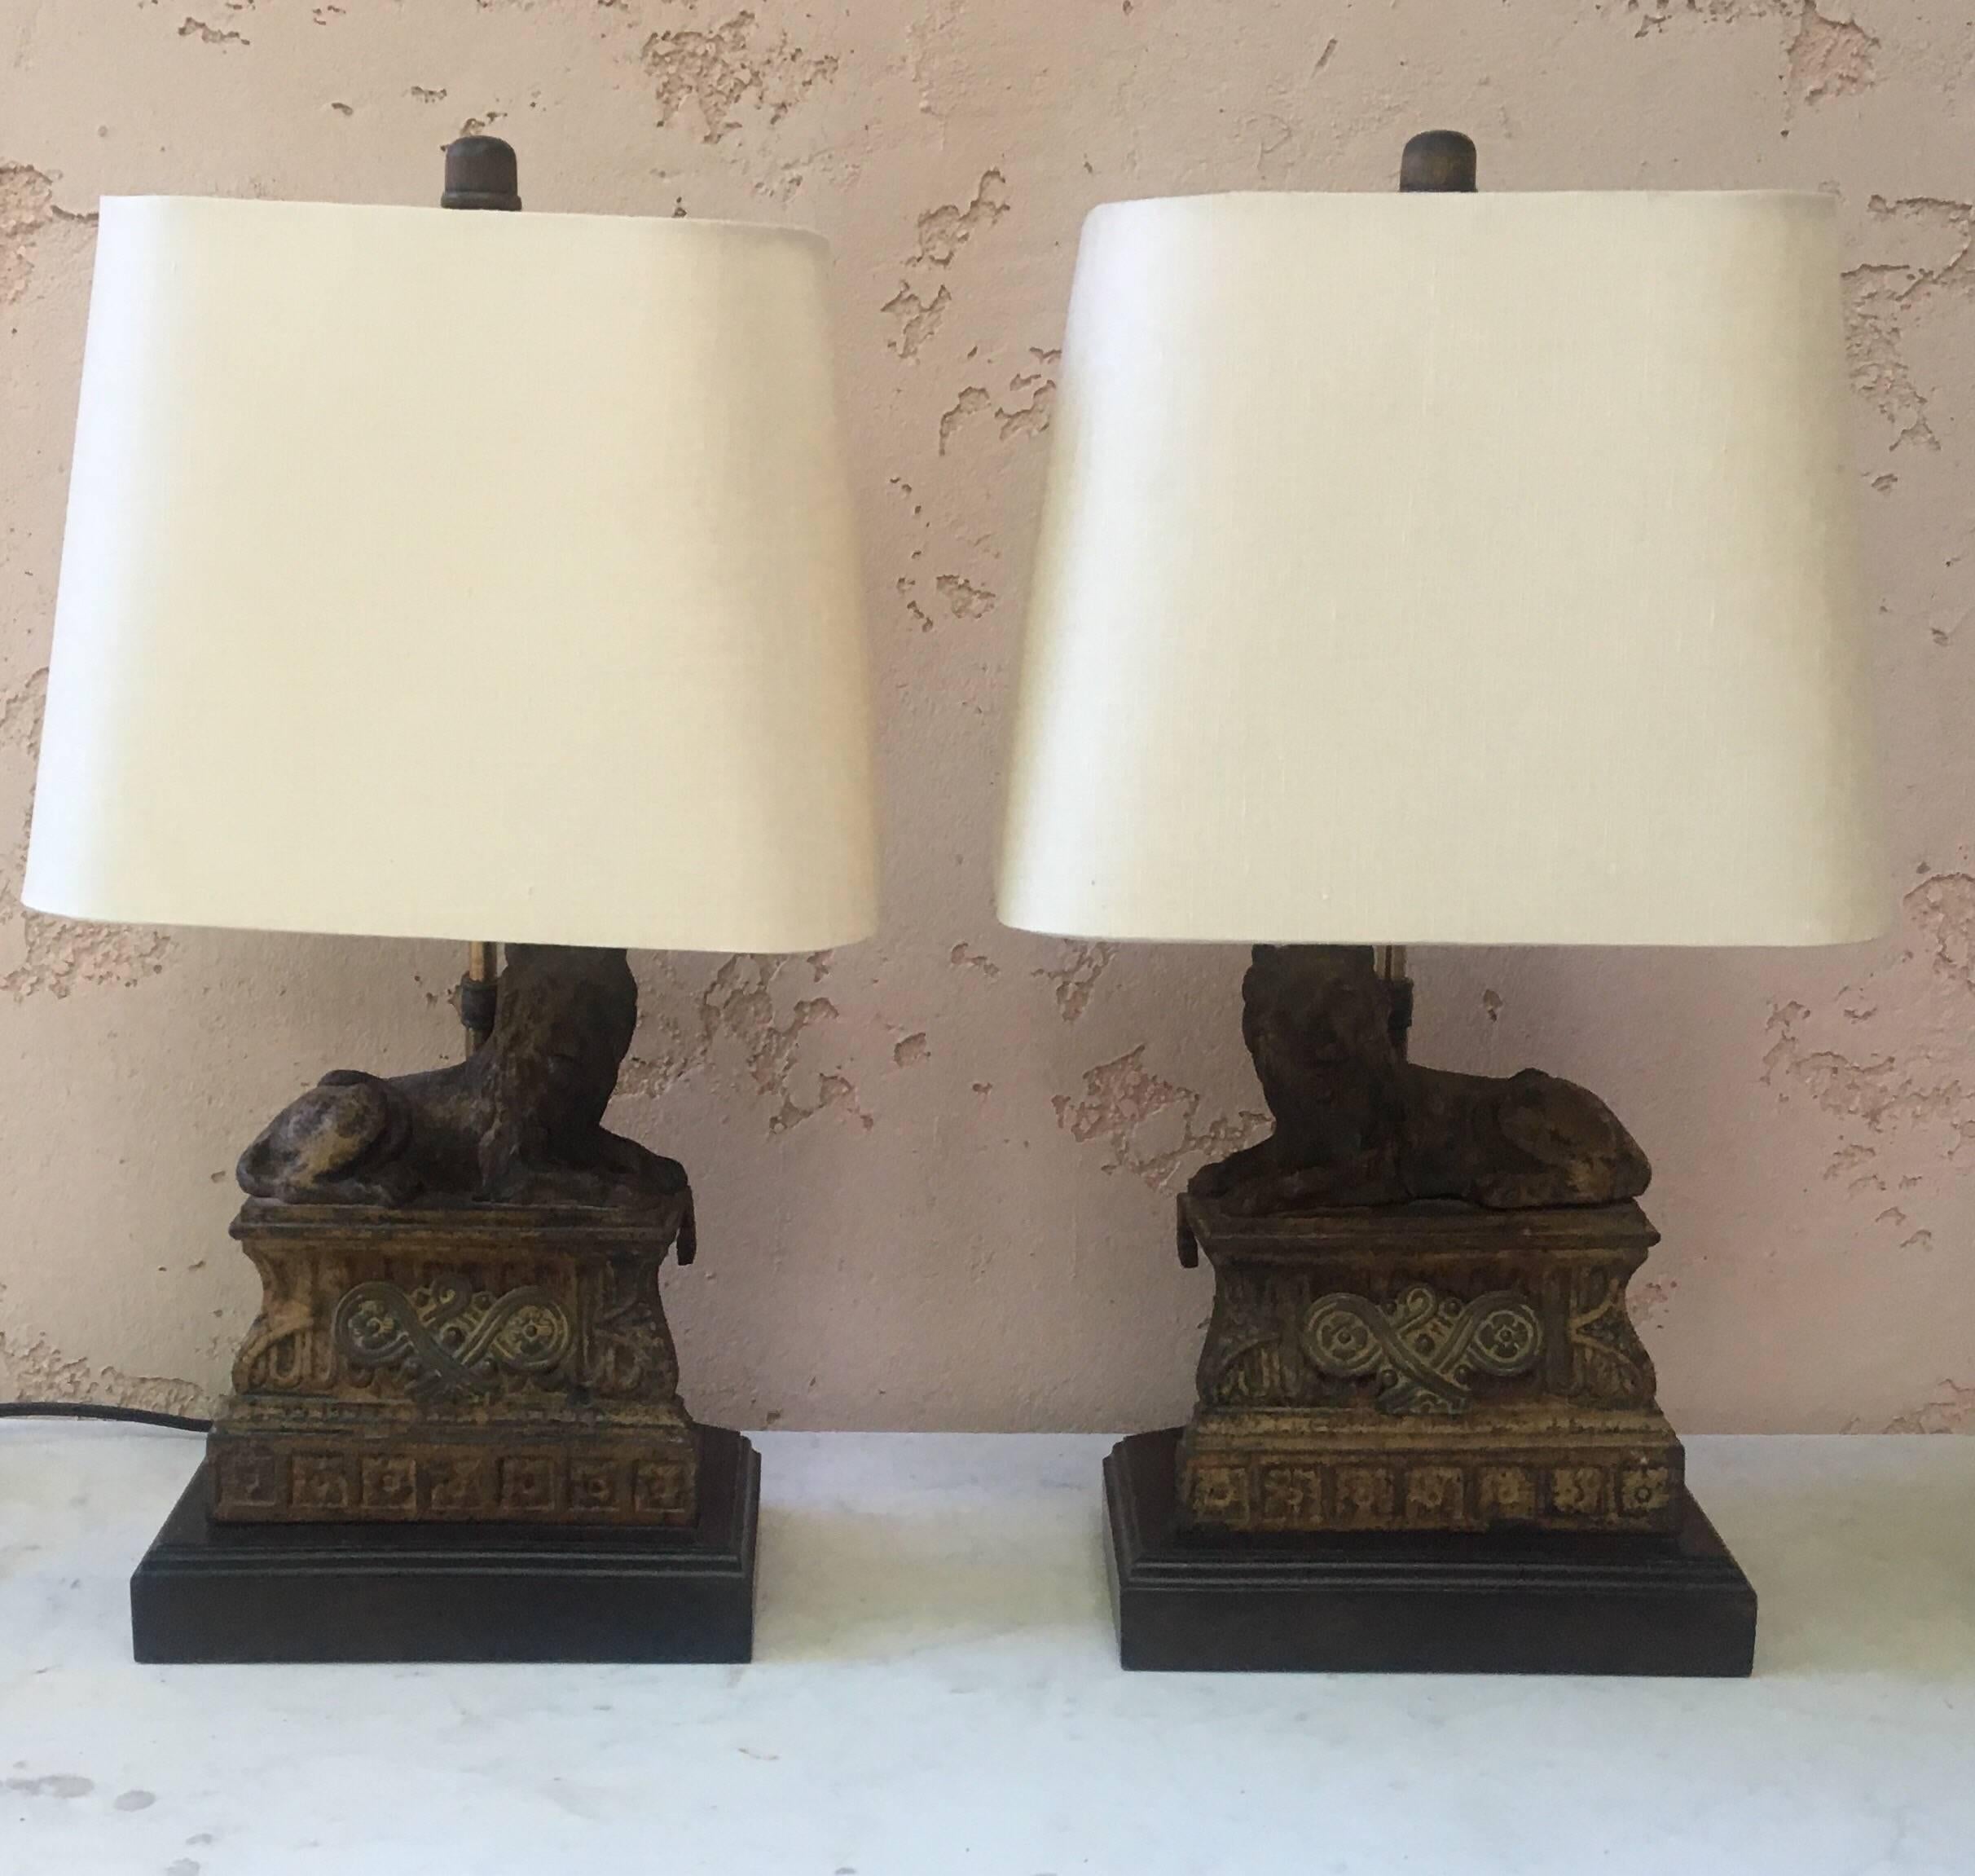 Pair of table lamps made with 19th century French cast iron lions.
Wired for US use and in working conditions.
Ecru linen shades included one is damaged.